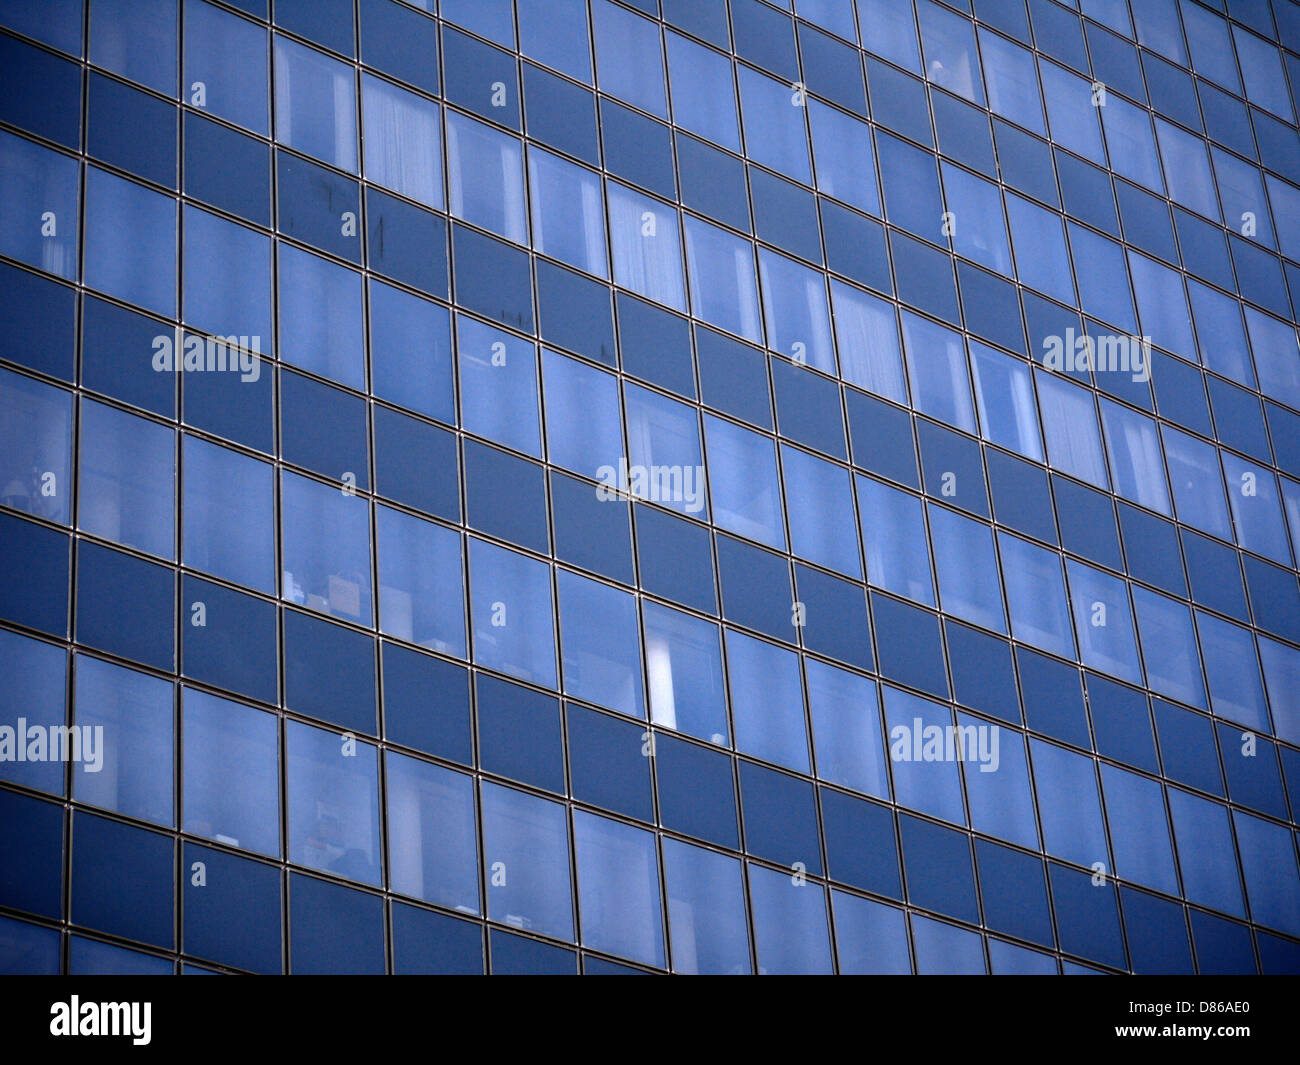 A abstract image of a office building located in downtown Tyler Texas. Stock Photo